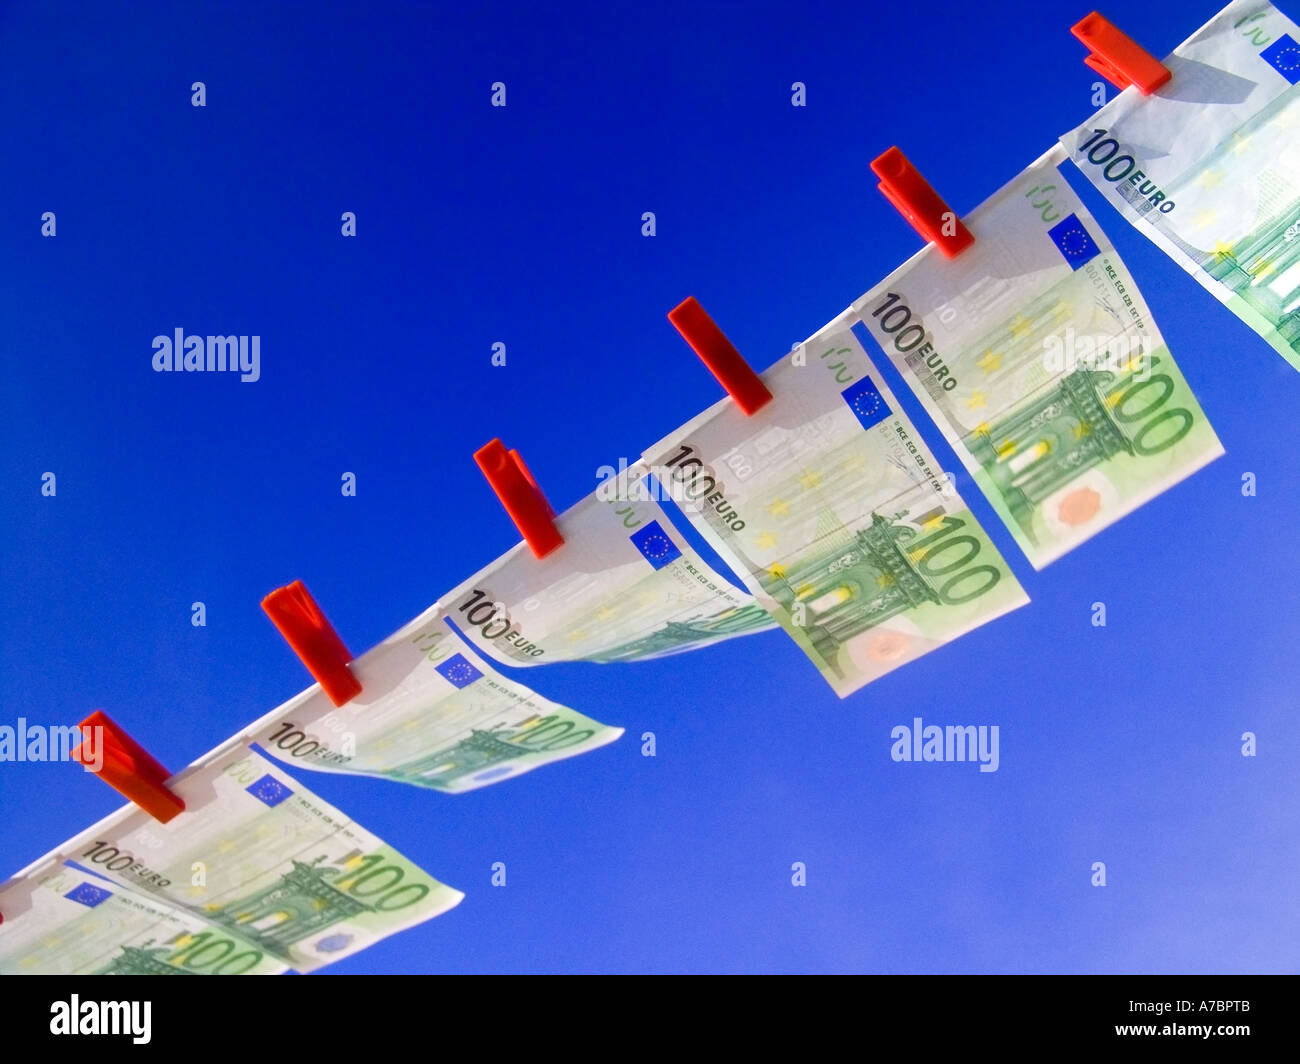 EURO NOTES WASHING LINE Crisp new 100 Euro notes fluttering flying high in the breeze pegged in a line against a sunny blue sky Horizontal Landscape Stock Photo